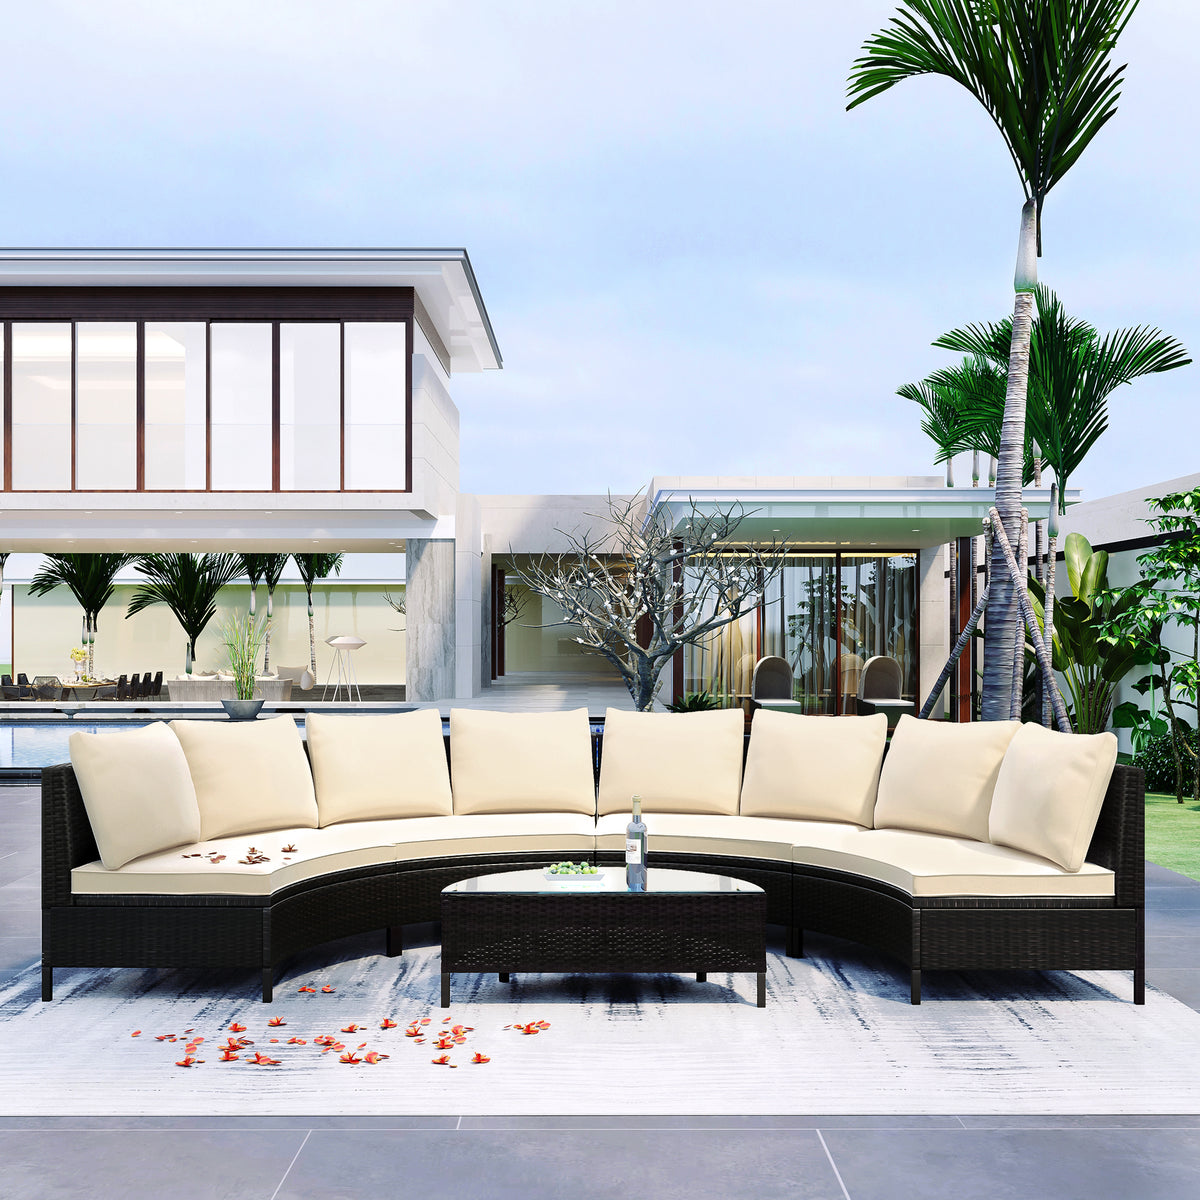 5 Pieces All-Weather Brown PE Rattan Sofa Half-Moon Sofa Set with Tempered Glass Table, Beige